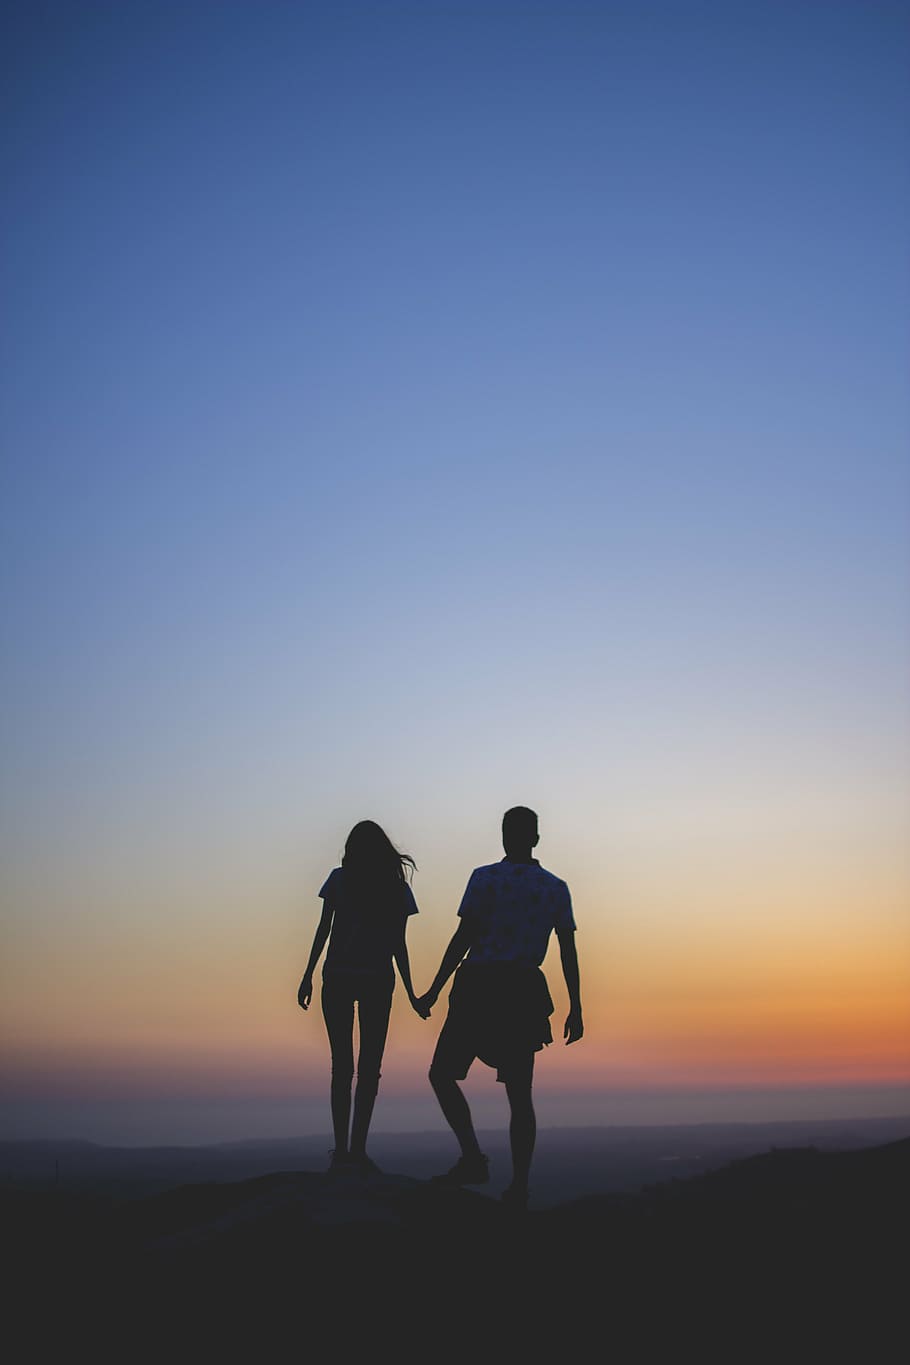 5120x2880px | free download | HD wallpaper: couple, holding hands, love ...